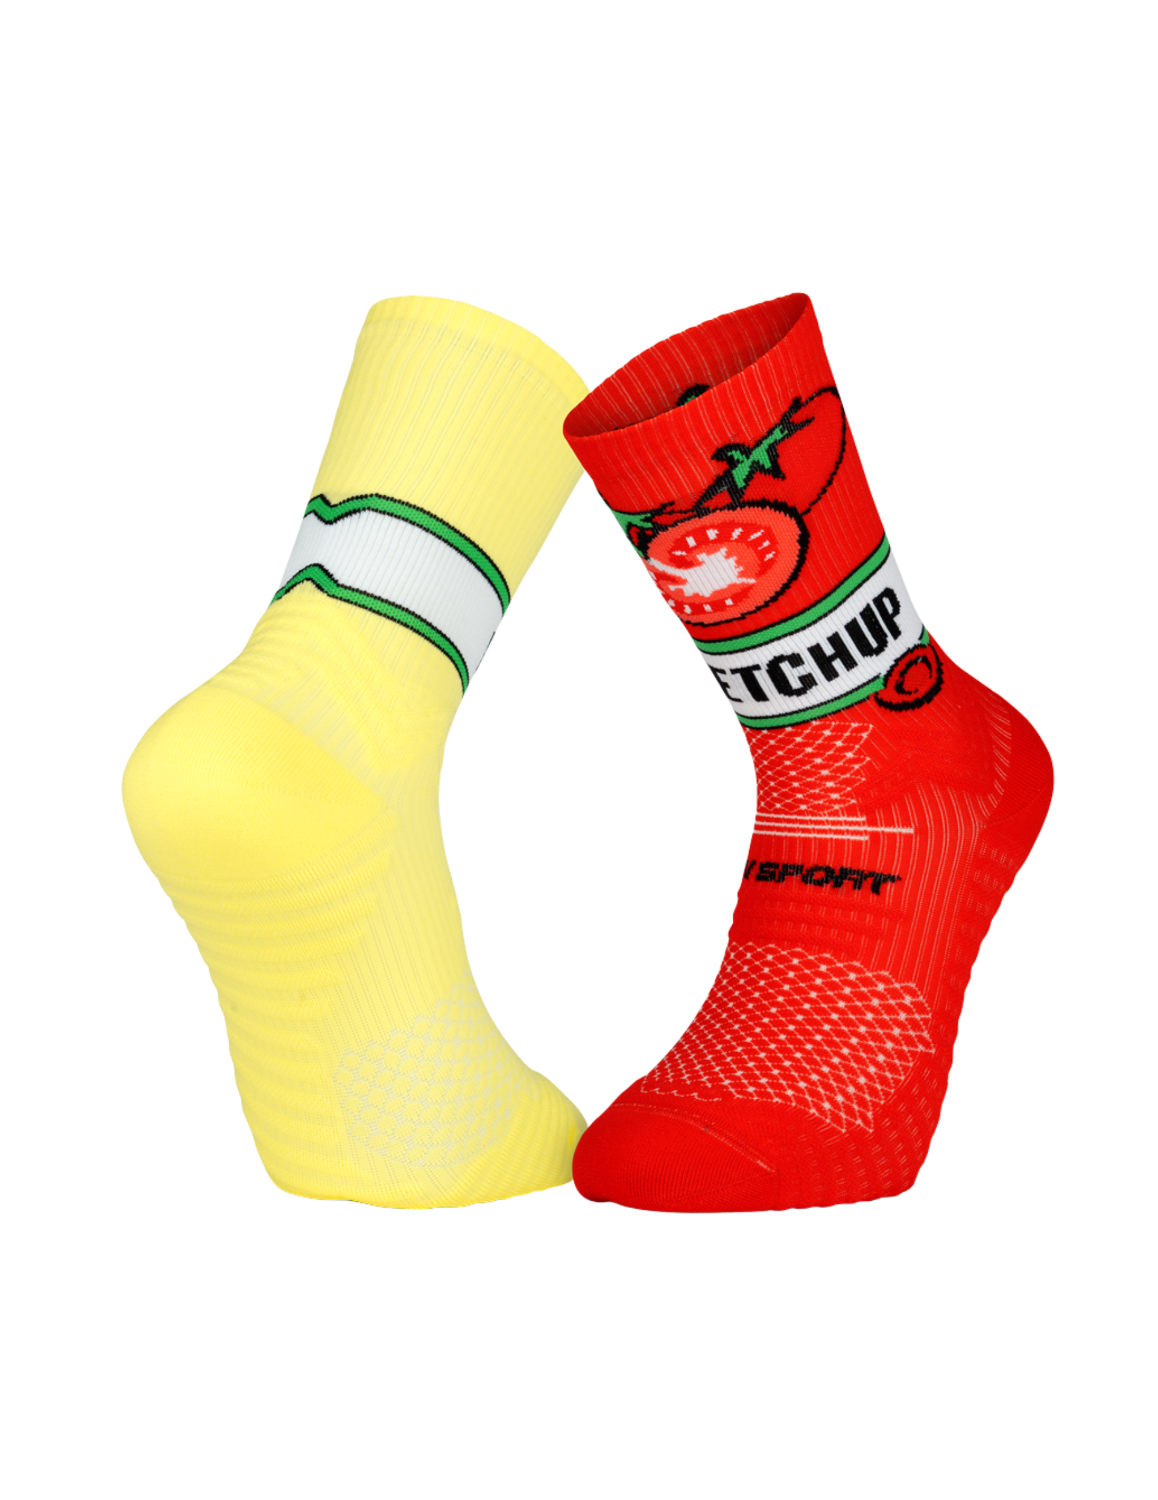 Chaussettes de Running BV Sport Trail Ultra Collector "Nutri" Ketchup-Mayo